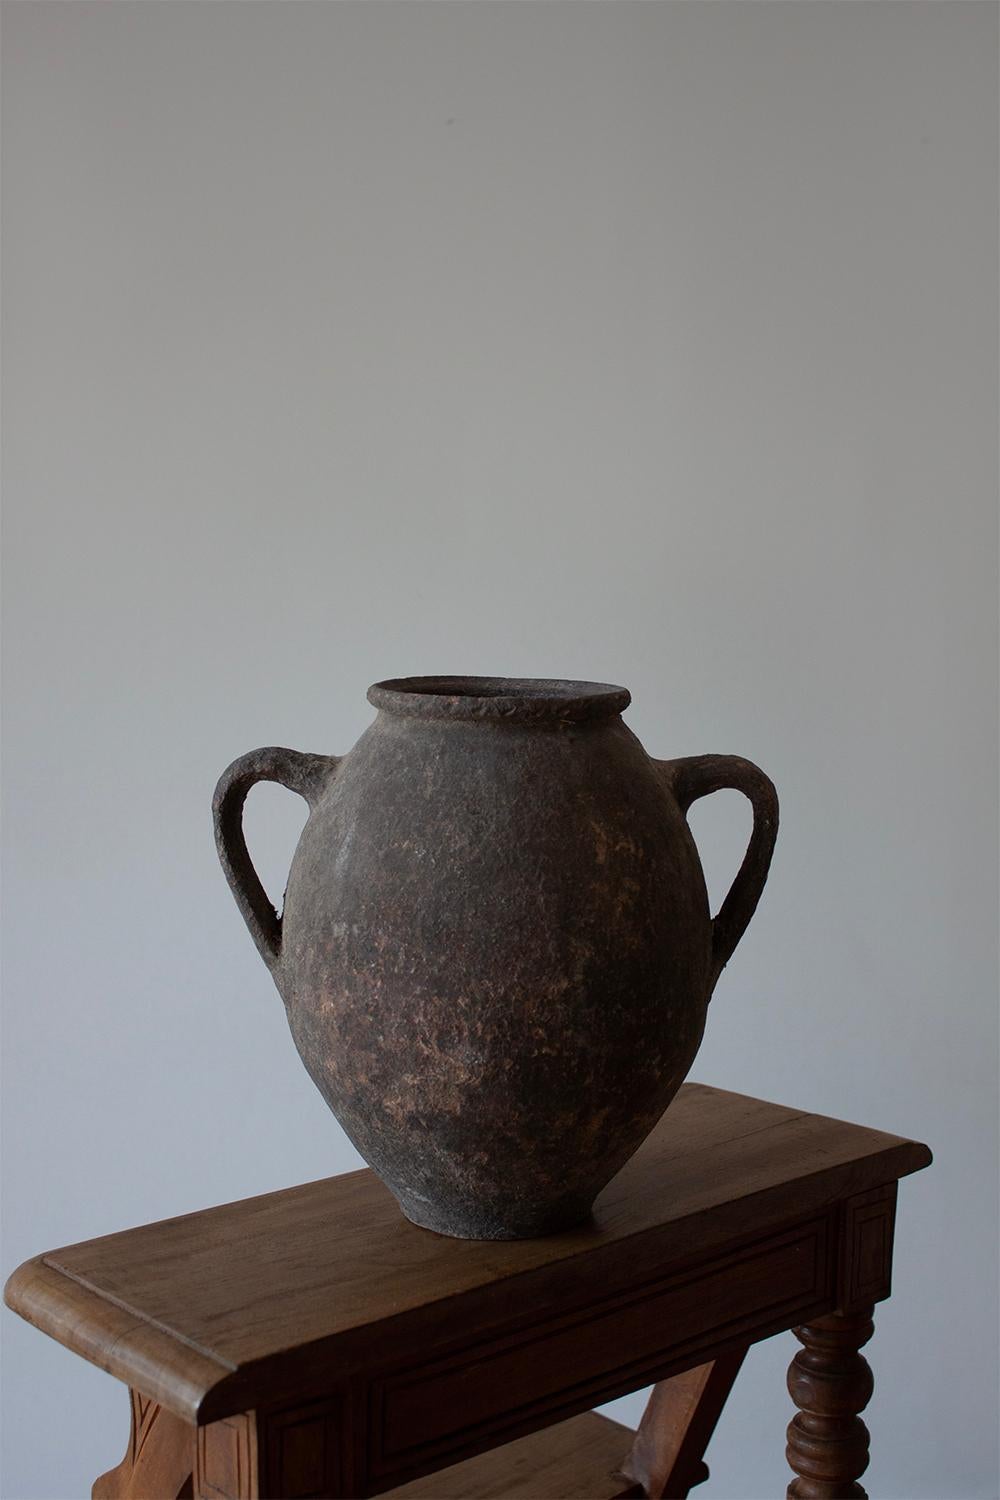 This antique pot has its origin in the area between Greece and Turkey and is a percent representation of the traditional meditation aesthetic. This ceramic pot bears witness to a bygone era of the 18th and 19th century, capturing the essence of the